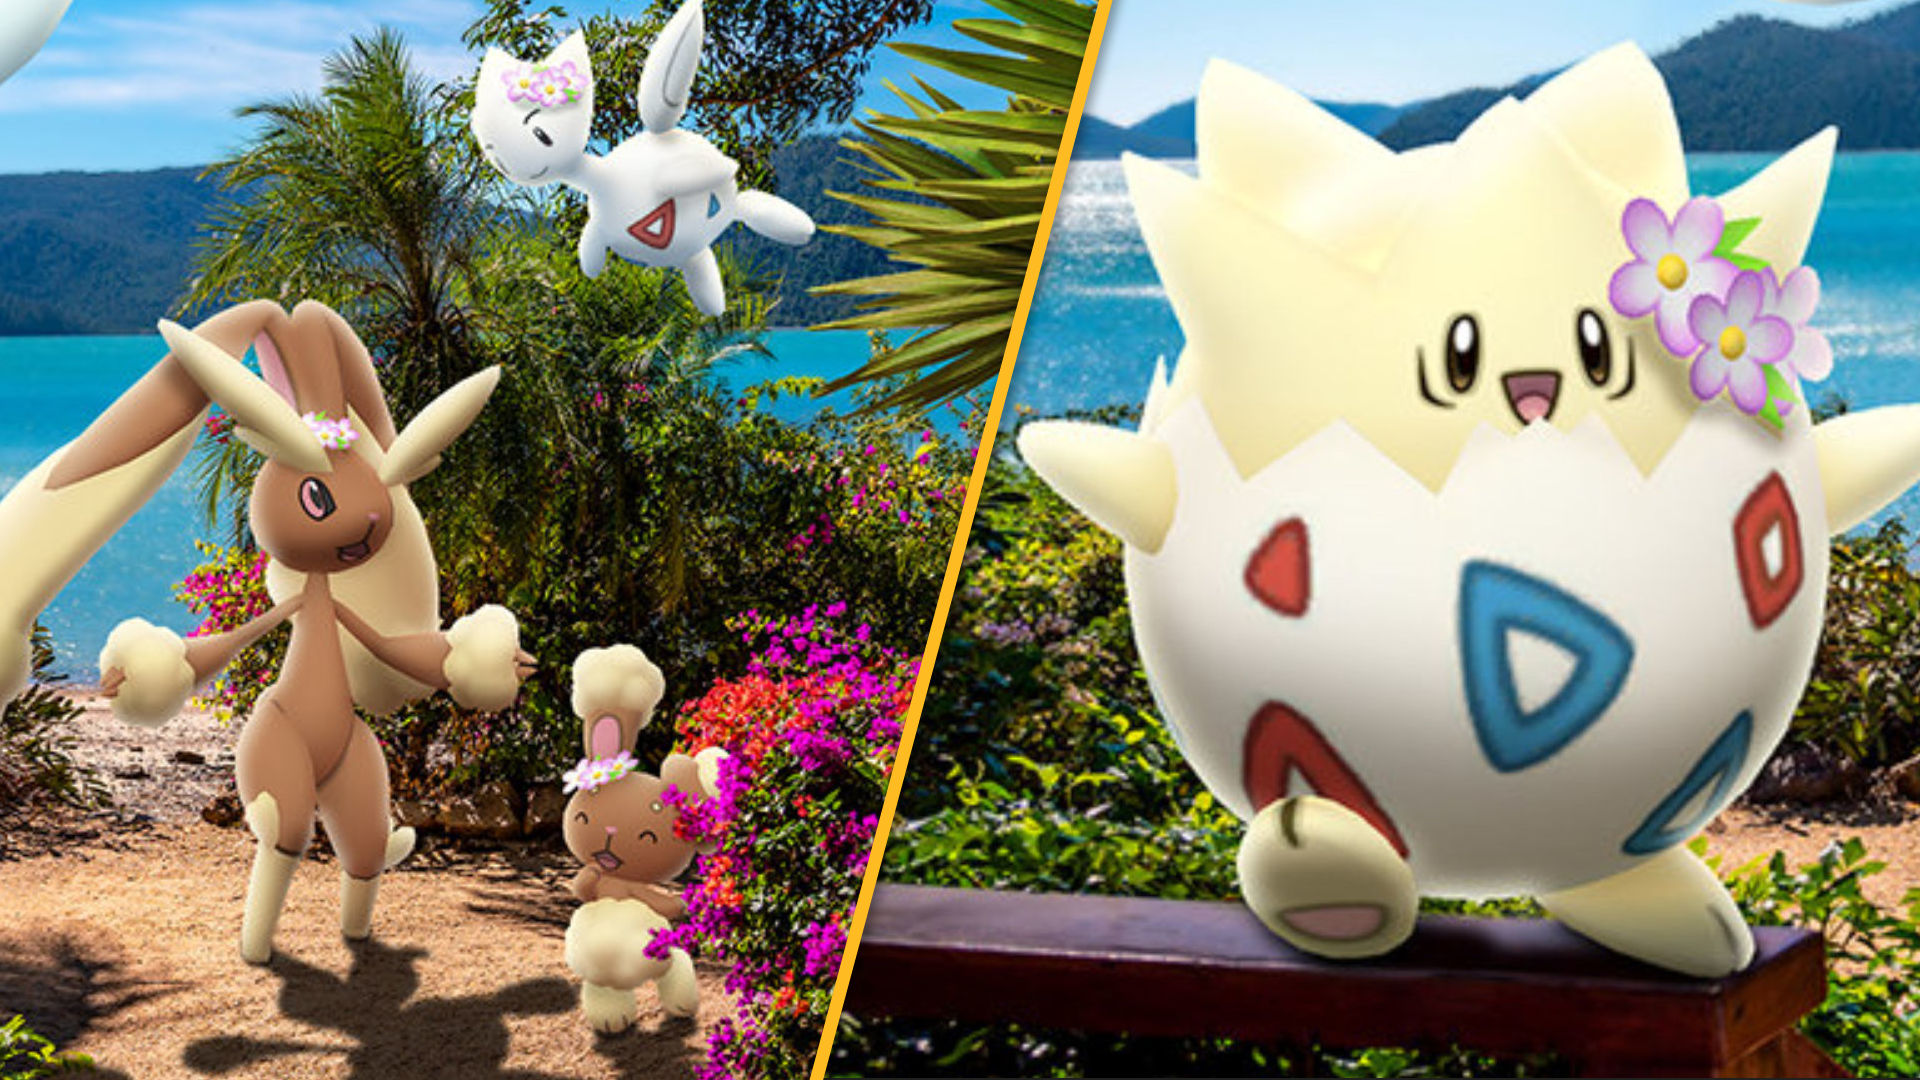 Have a blooming great time in the Pokémon Spring into Spring event